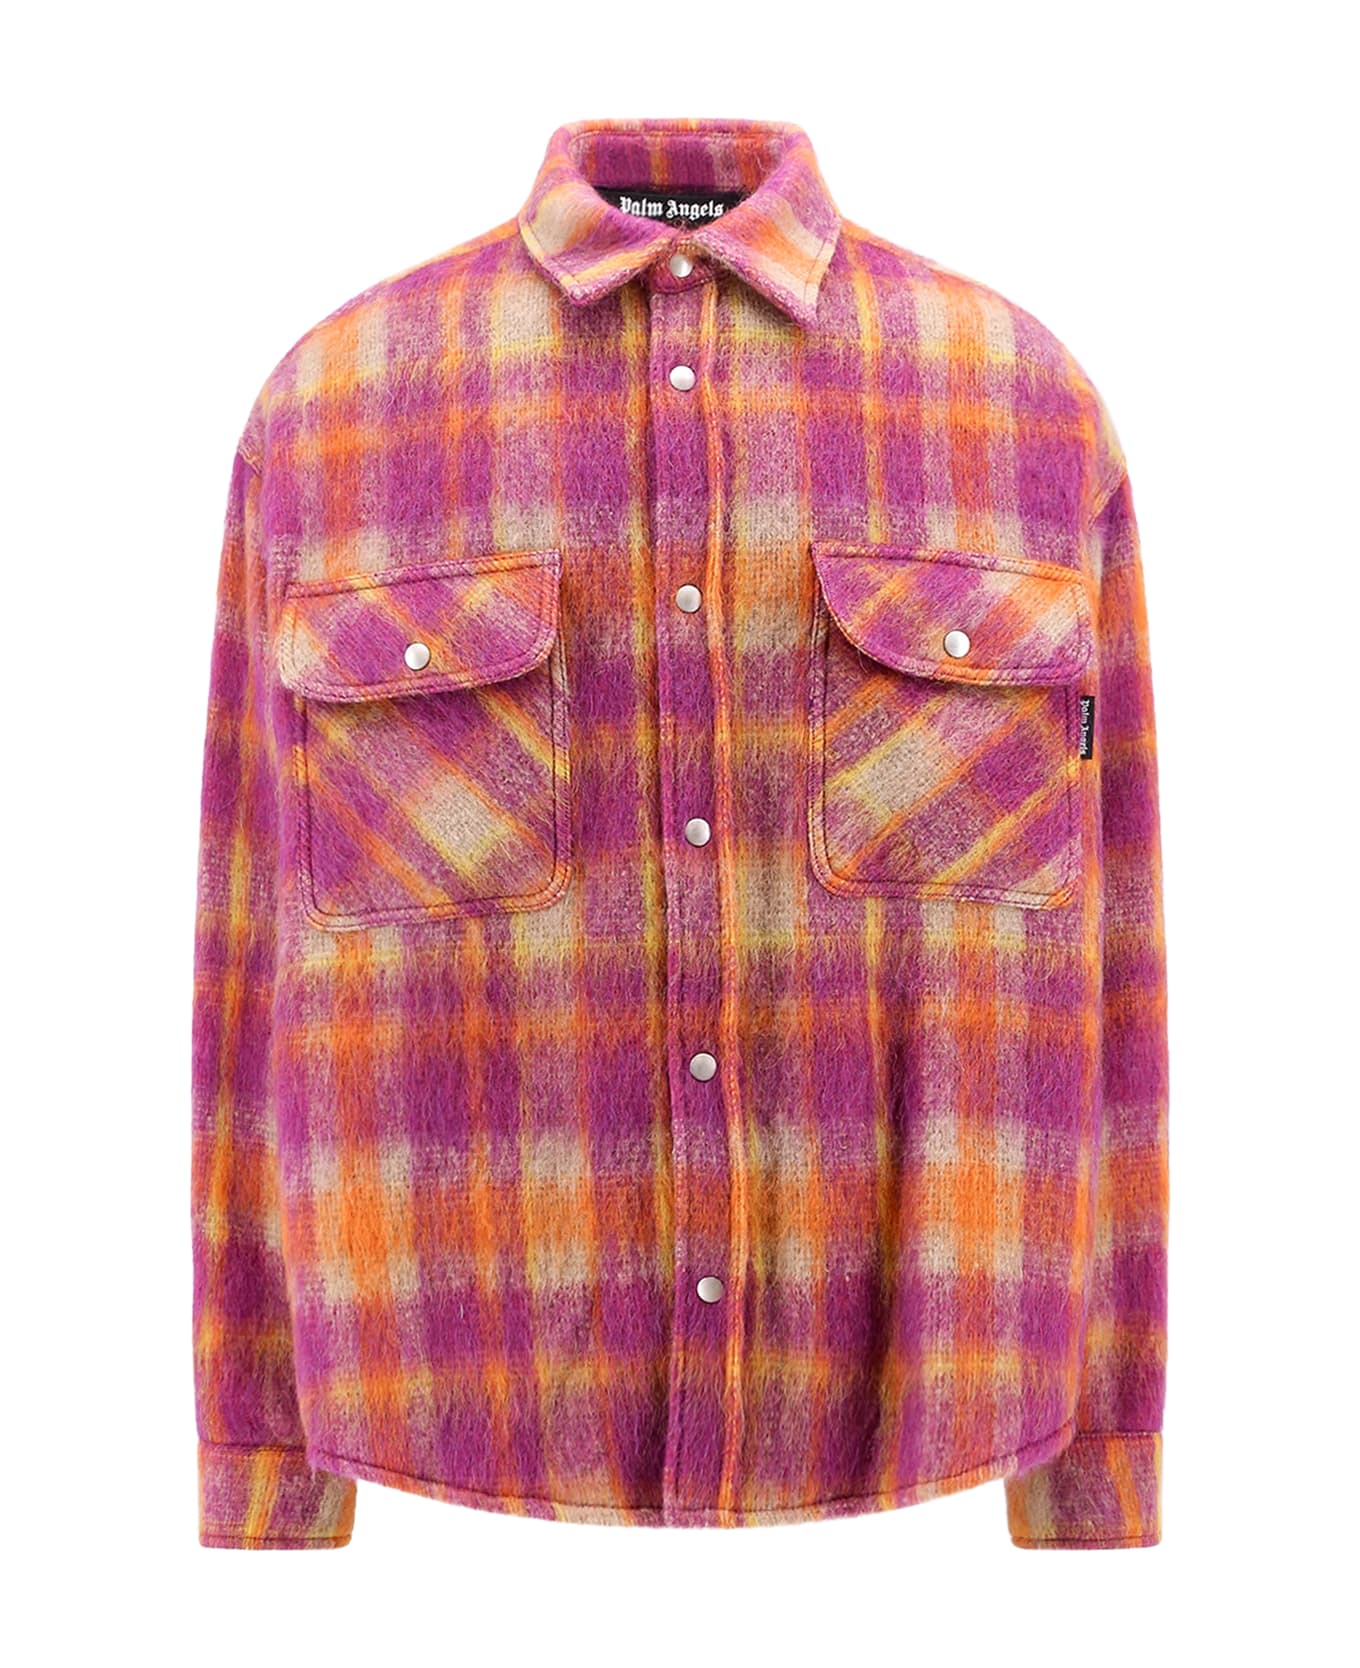 Palm Angels Brushed Wool Check Overshirt - Multicolor ジャケット